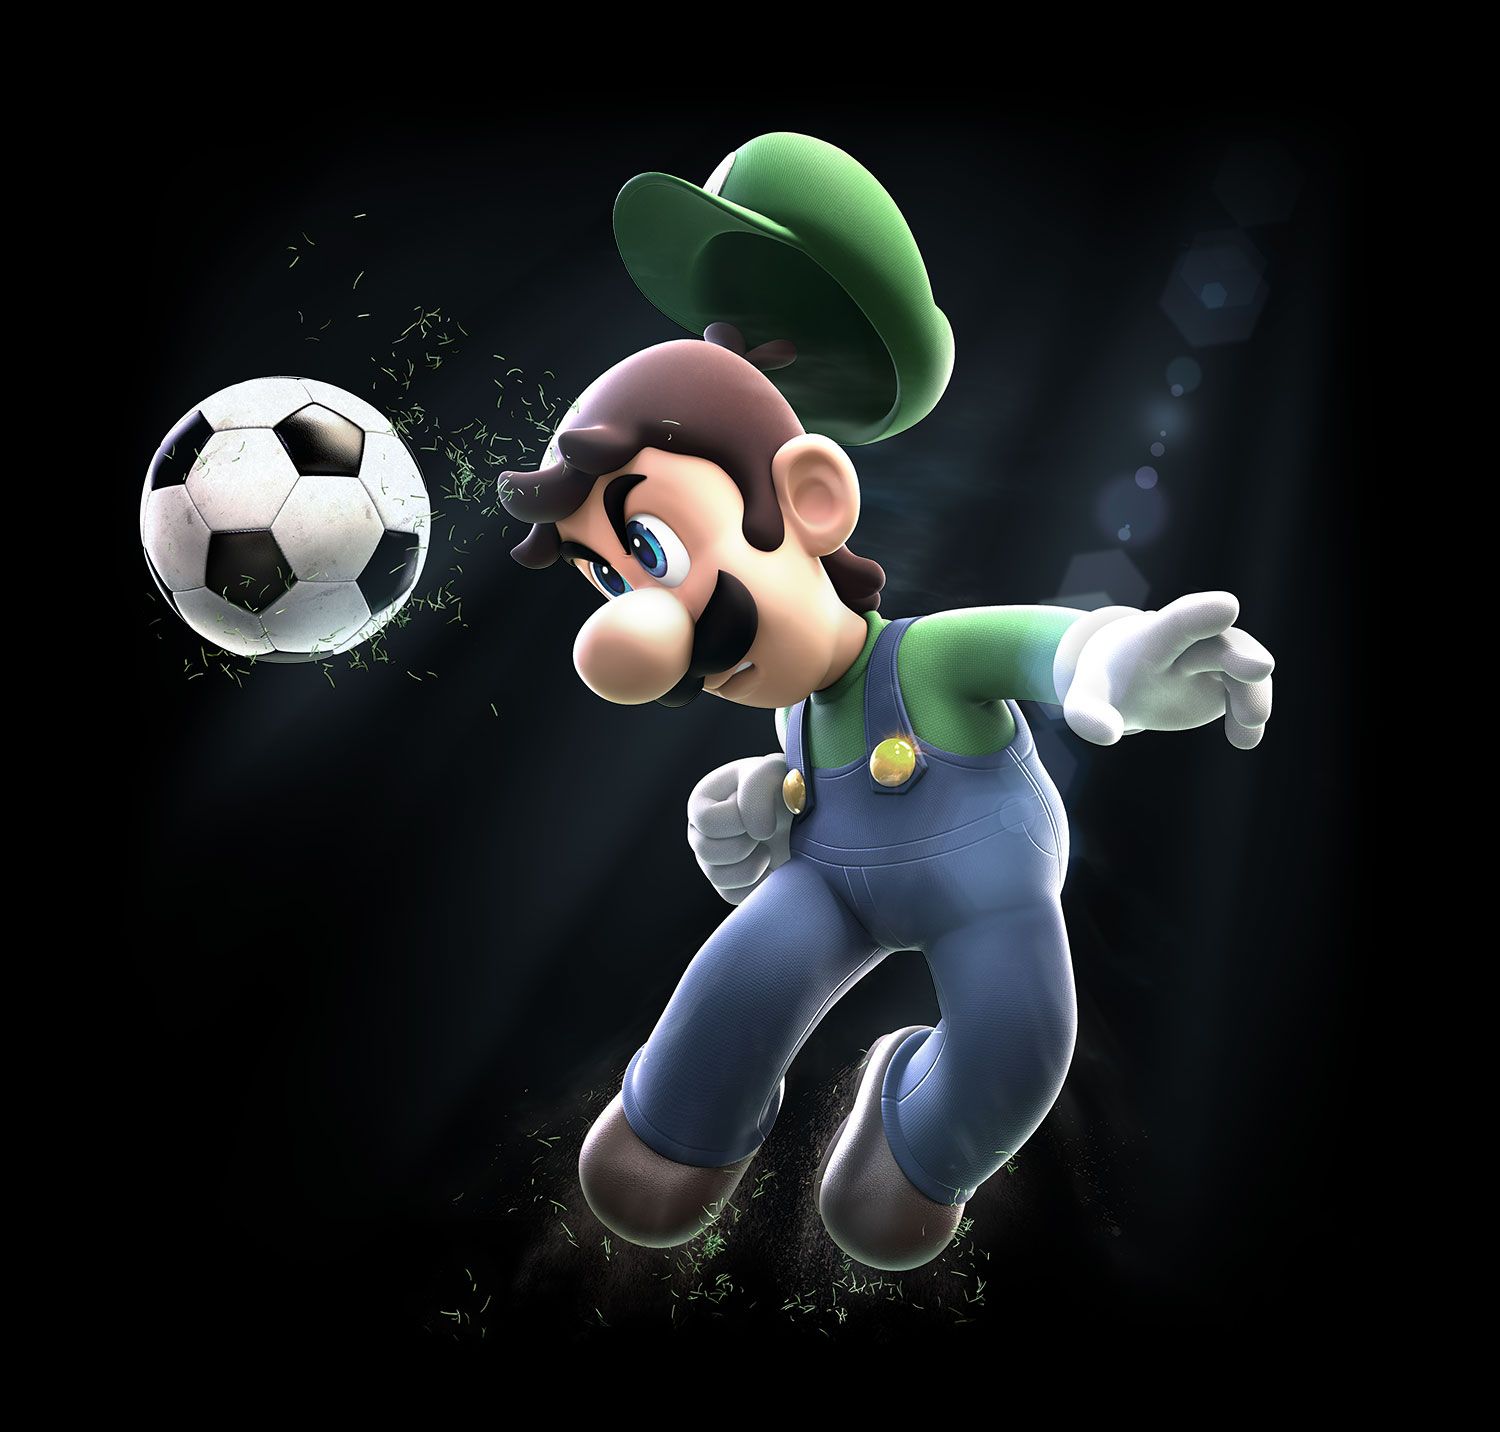 Free download Compete to be the best in Mario Sports Superstars